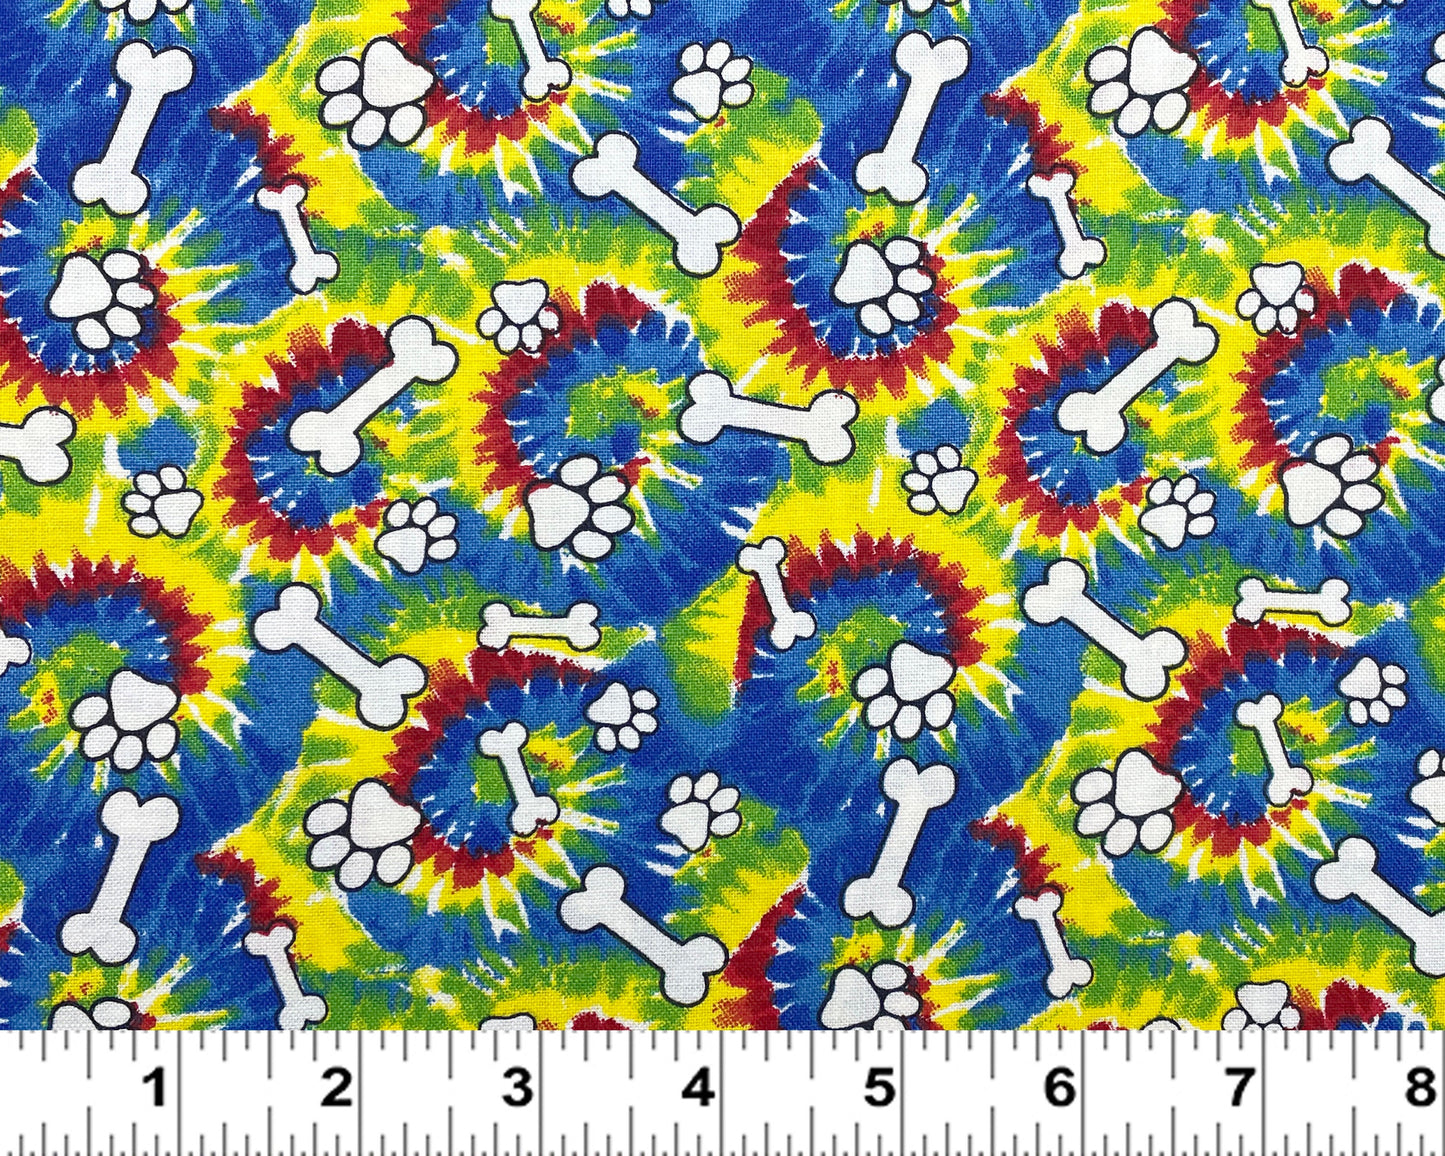 Dog Tie Dye Fabric - 100% cotton - Dog Bones and Paws Tie Dye material dog fabric quilting cotton - SHIPS NEXT DAY